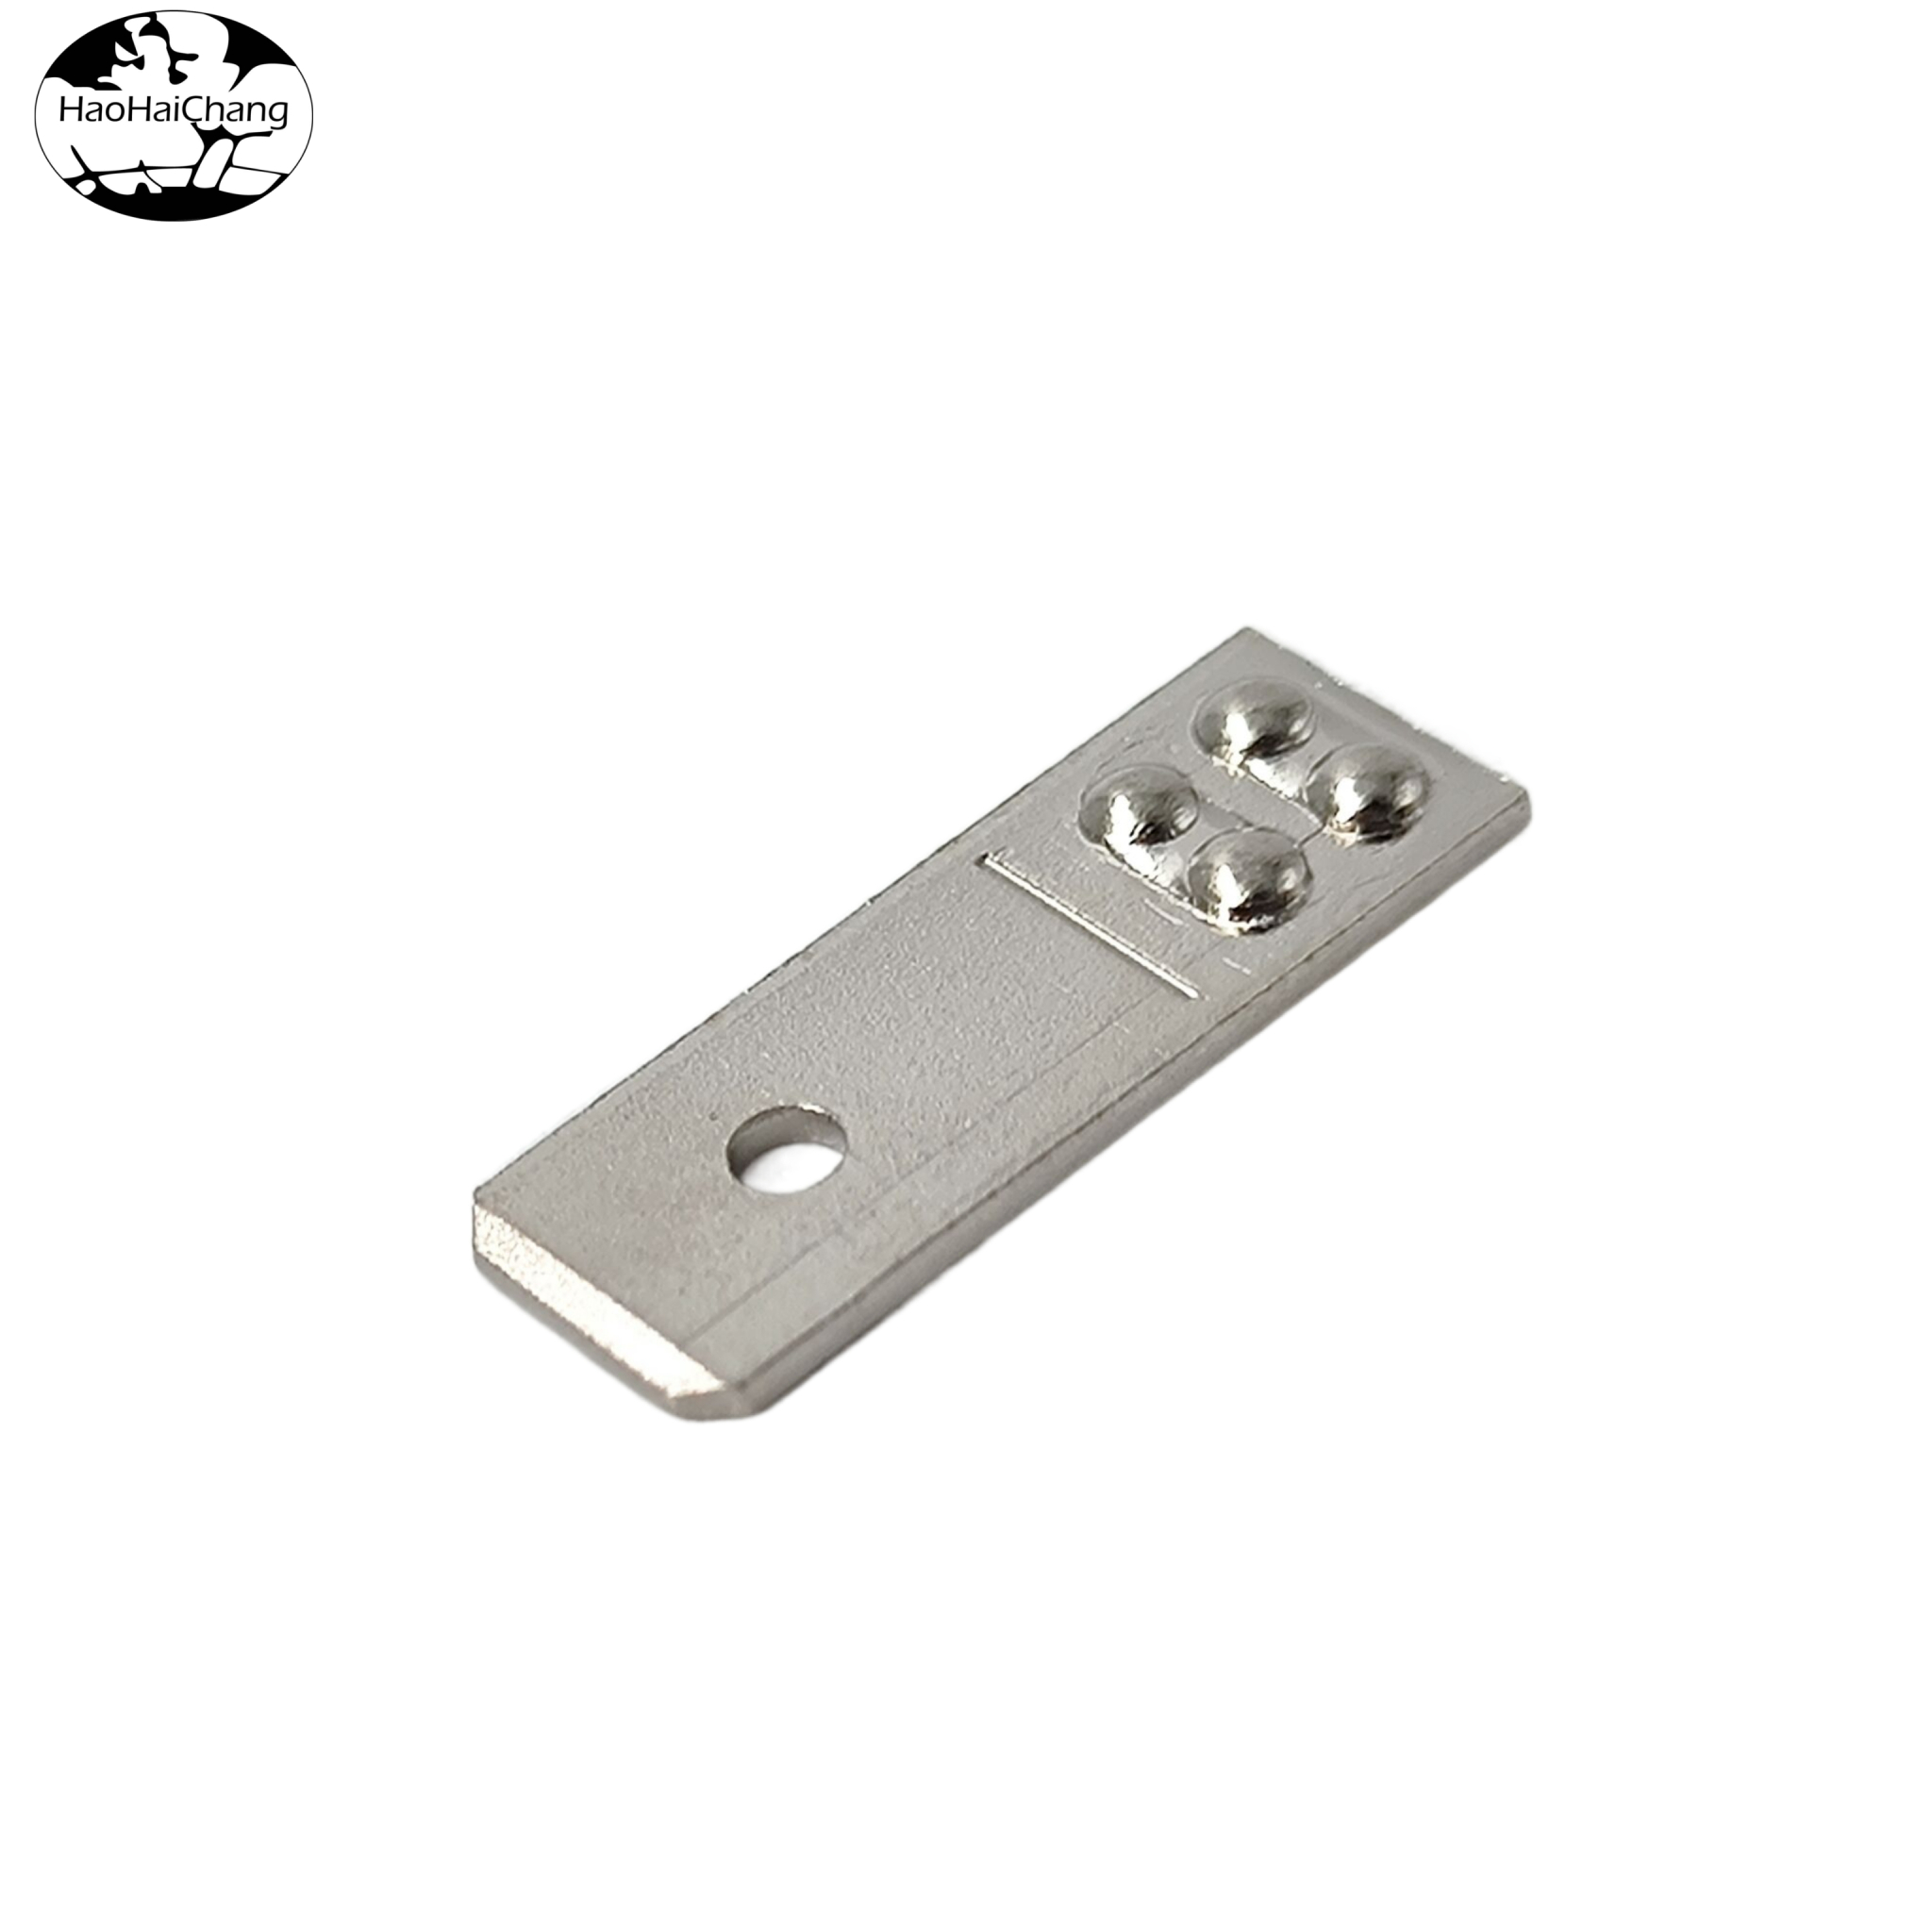 HHC-0224 Connector